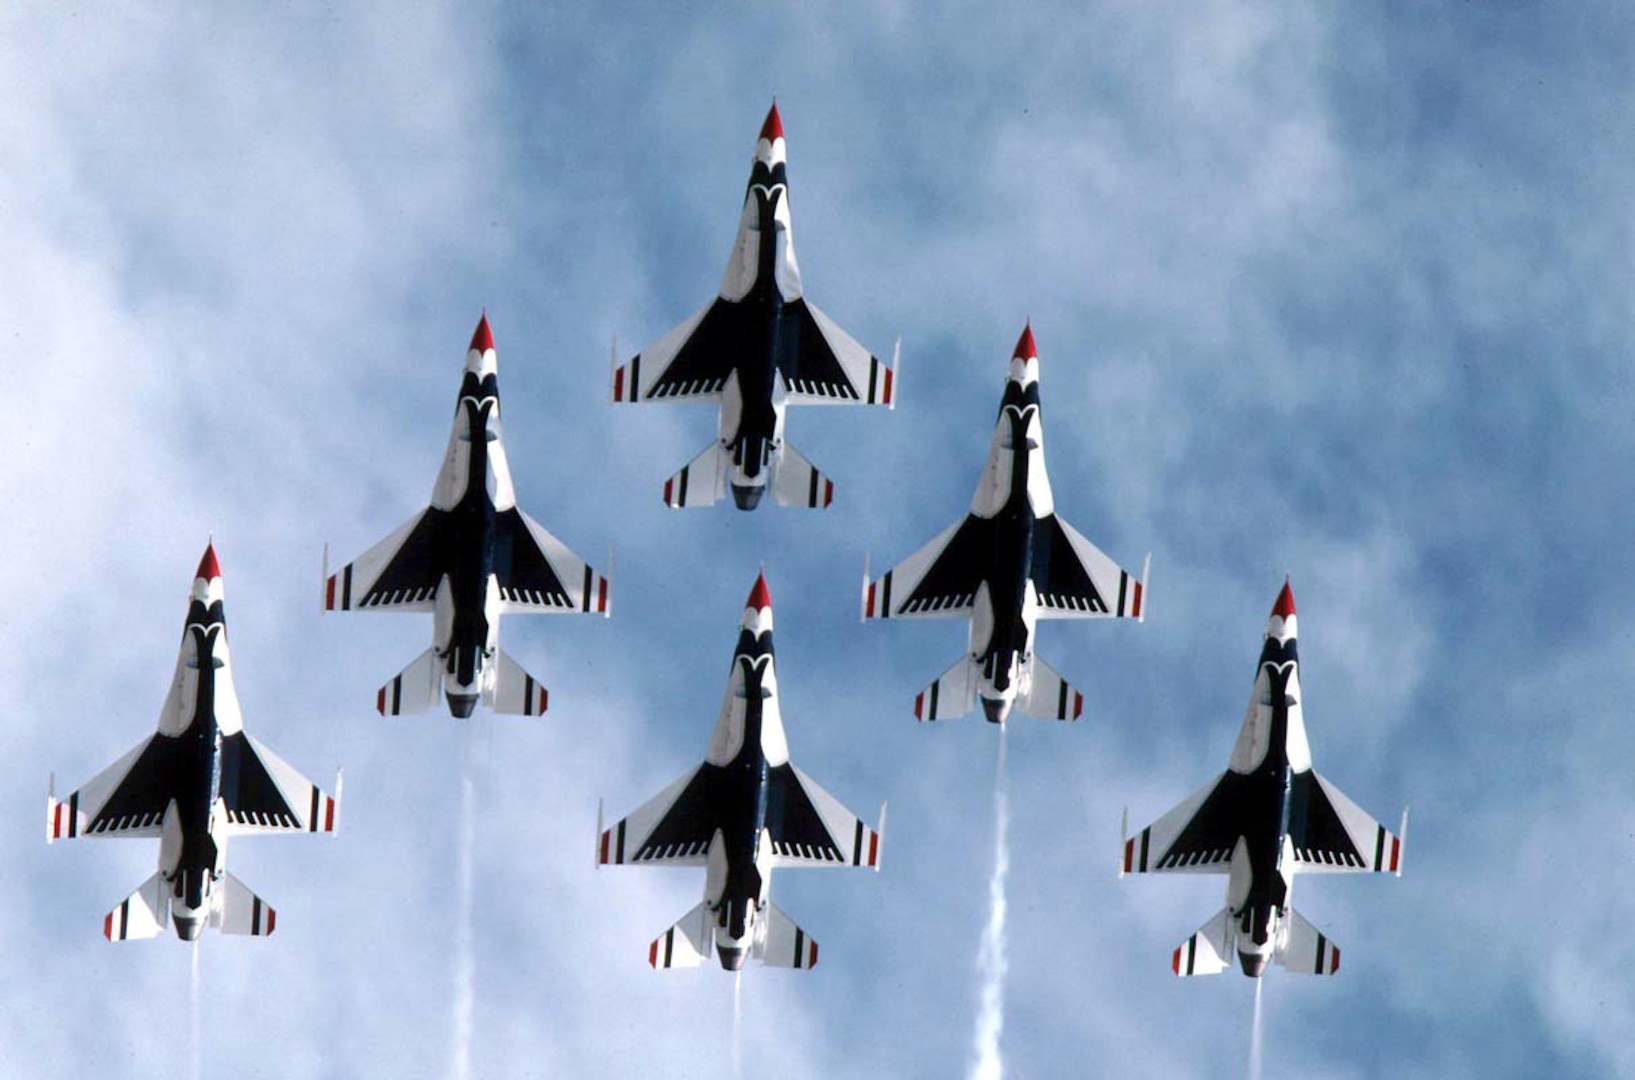 FILE PHOTO -- The U.S. Air Force Air Demonstration Squadron, the Thunderbirds, performs precision aerial maneuvers demonstrating the capabilities of Air Force high performance aircraft to people throughout the world. The squadron exhibits the professional qualities the Air Force develops in the people who fly, maintain and support these aircraft. The Thunderbirds squadron is an Air Combat Command unit composed of eight pilots (including six demonstration pilots), four support officers, three civilians and more than 130 enlisted personnel performing in 25 career fields. The Lockheed Martin (formerly General Dynamics) F-16 Fighting Falcon represents the full range of capabilities possessed by the Air Force's tactical fighters. This highly maneuverable multi-role fighter has proven itself to be one of the world's best precision tactical bombers and air-to-air combat aircraft. The only modifications needed to prepare the aircraft for its air demonstration role are installing a smoke-generating system in the space normally reserved for the 20mm cannon, and the painting of the aircraft in Thunderbird colors. (U.S. Air Force photo)
